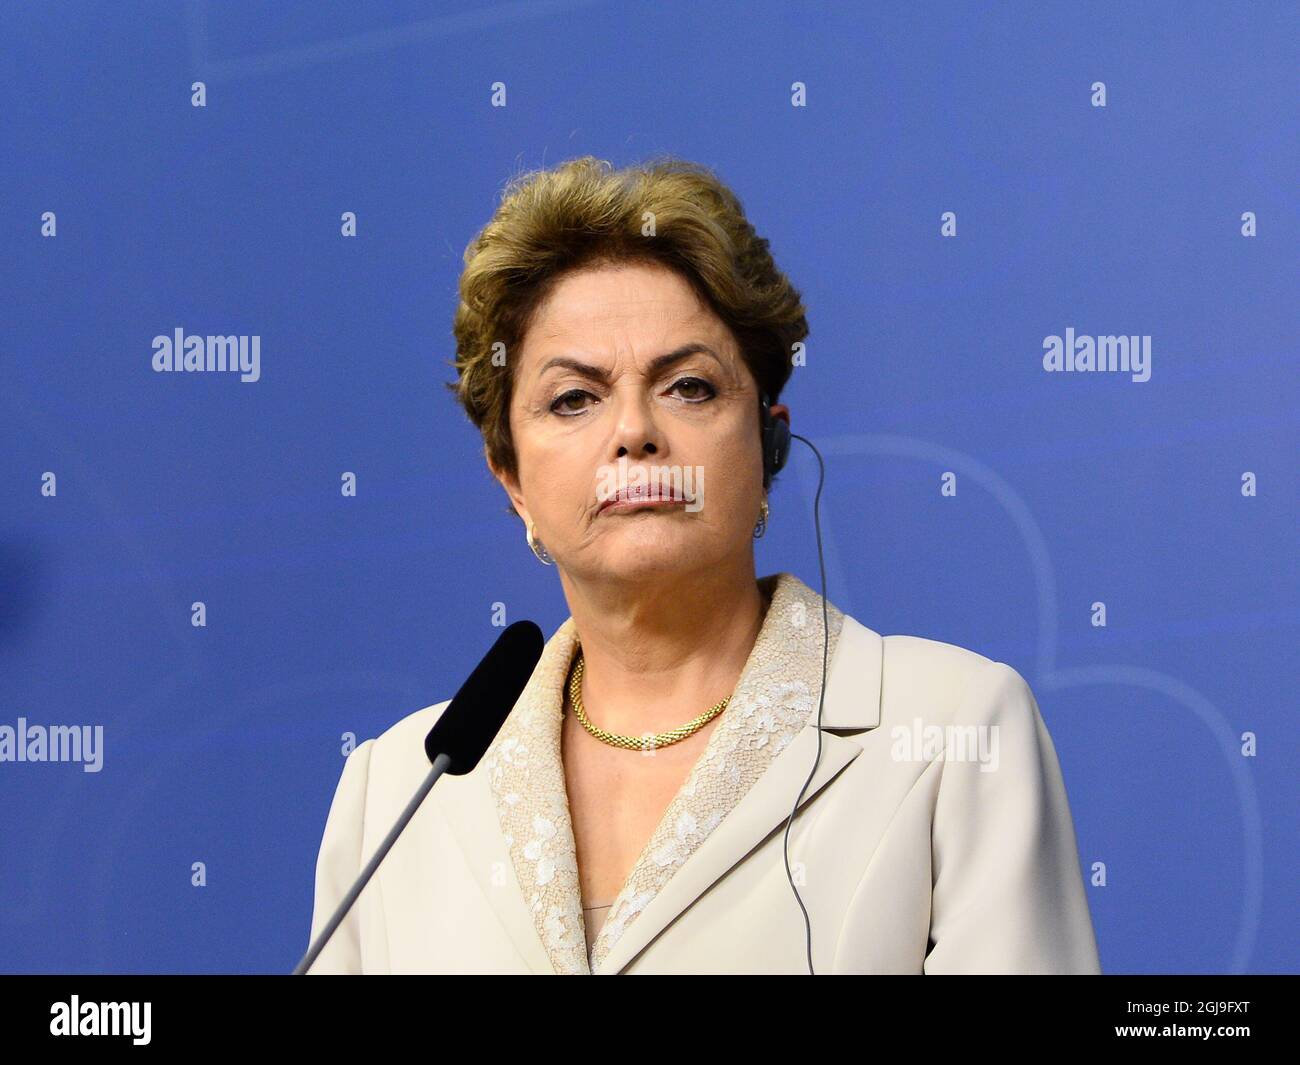 Brazil's President Dilma Rousseff is seen during a press conference together with Sweden's Prime minister Stefan Lofven (out of picture) at Rosenbad in Stockholm, October 19, 2015. Economic exchanges between Sweden and Brazil, climate and sustainability, and defence will be discussed during President Rousseff's two day visit to Sweden. Photo: Maja Suslin / TT / Kod 10300  Stock Photo